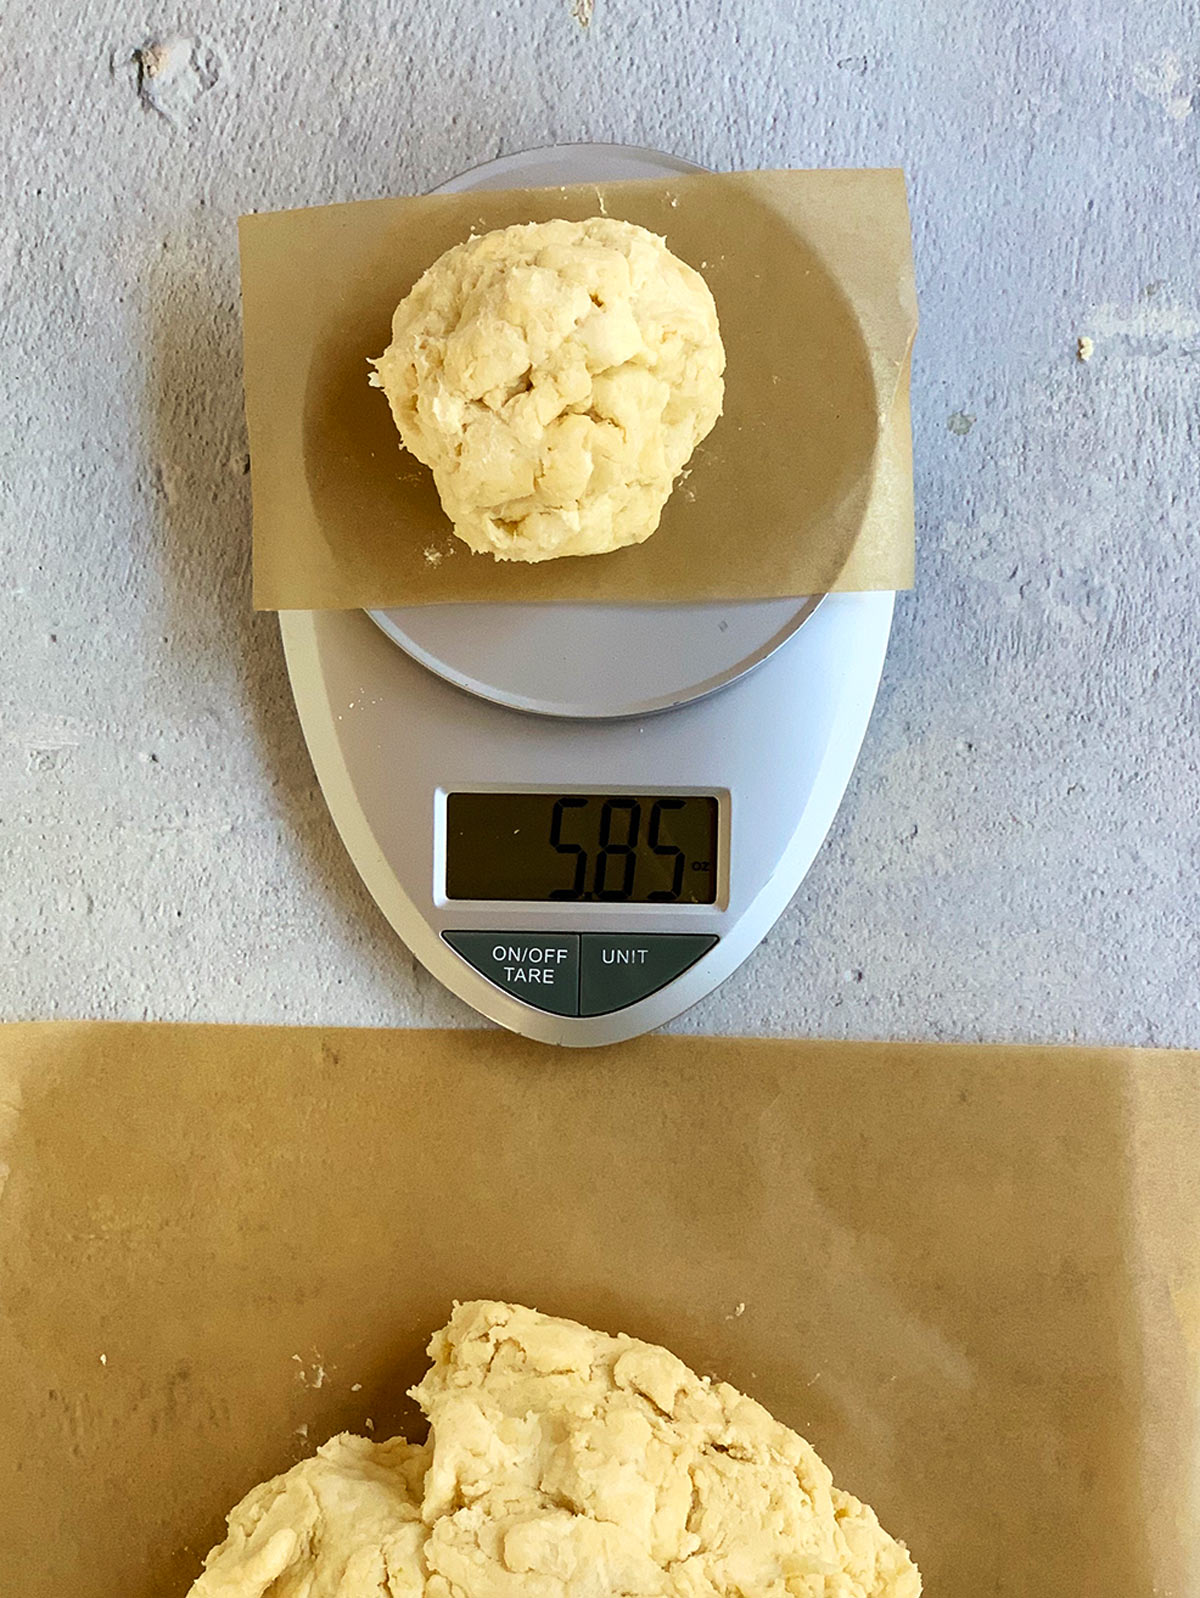 One dough ball measured on a scale to 5.85 ounces. More dough to the side, waiting to be weighed.